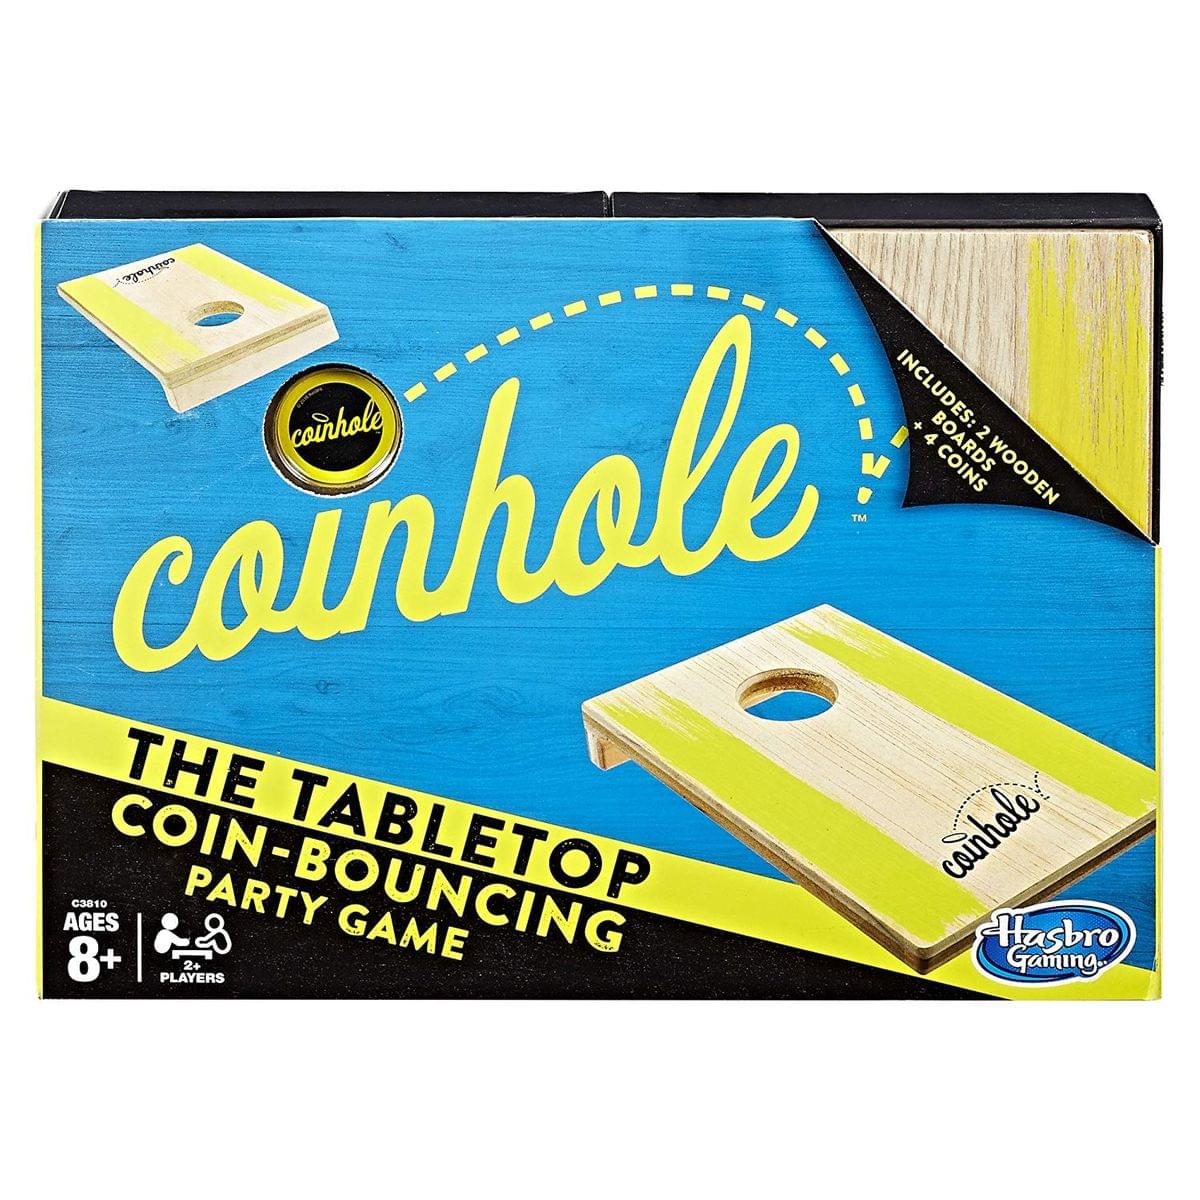 Coinhole Tabletop Coin-Bouncing Party Game